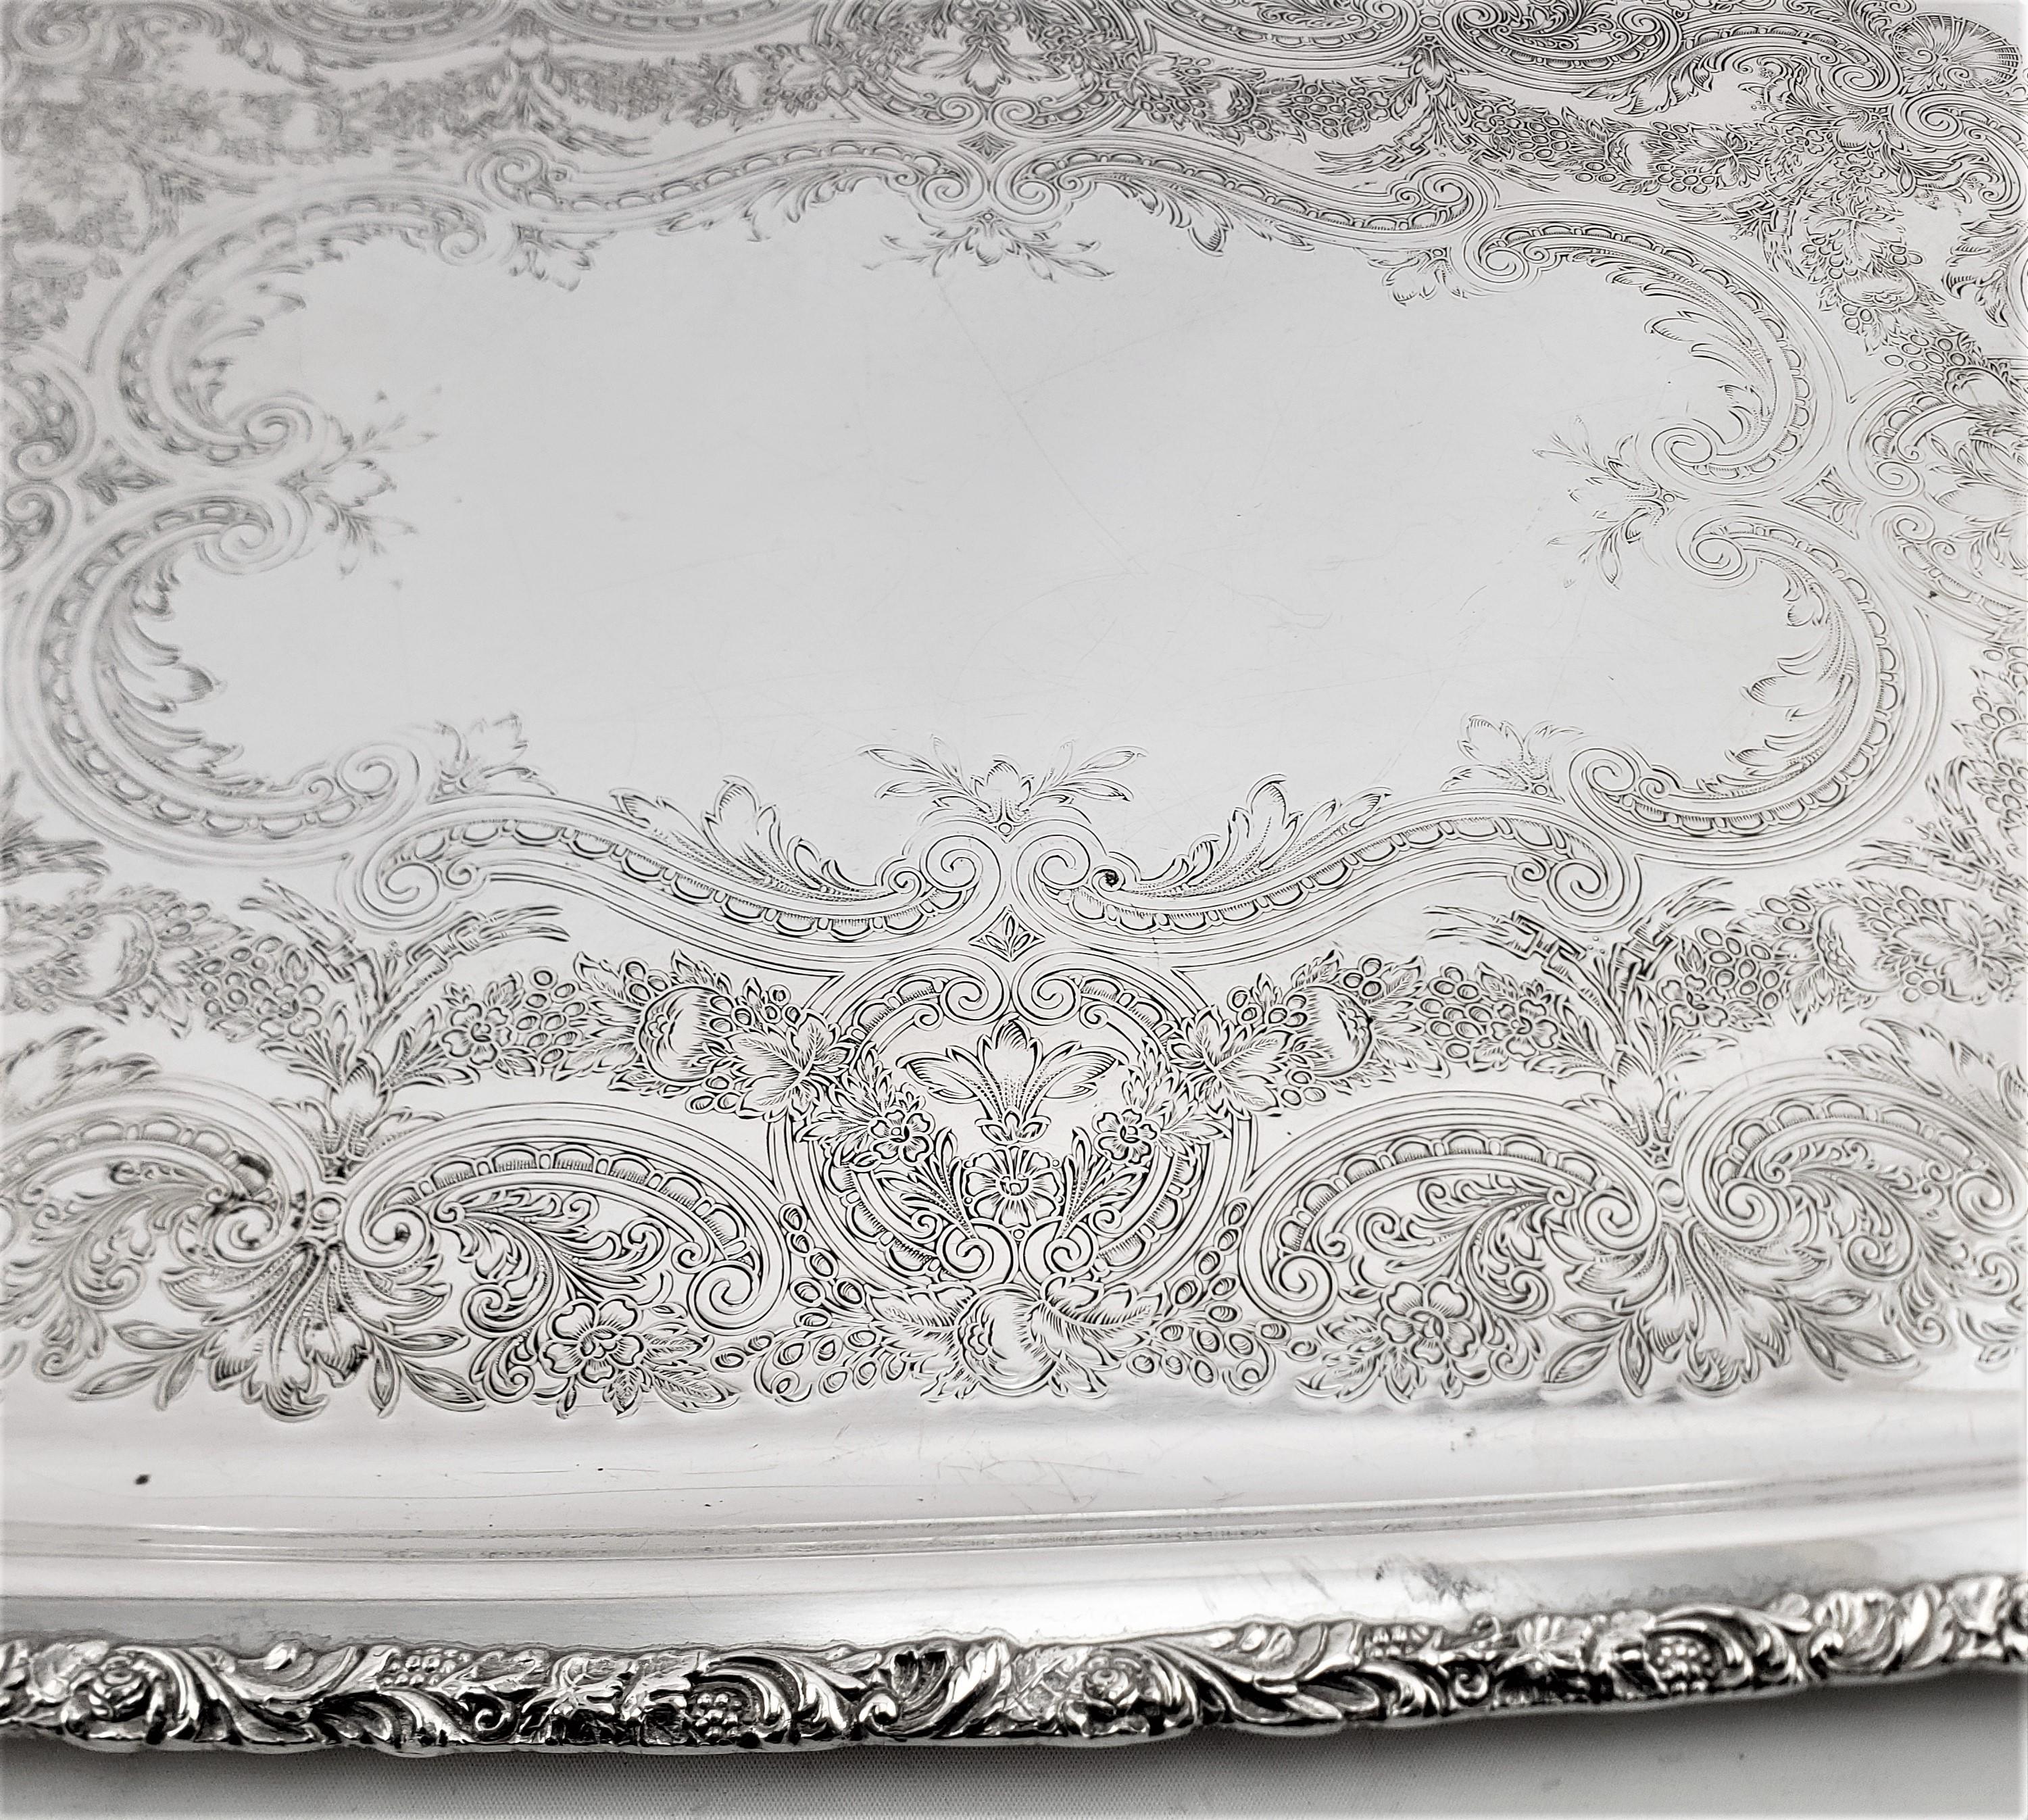 Large Antique English Silver Plated Serving Tray with Ornate Handles & Engraving 4